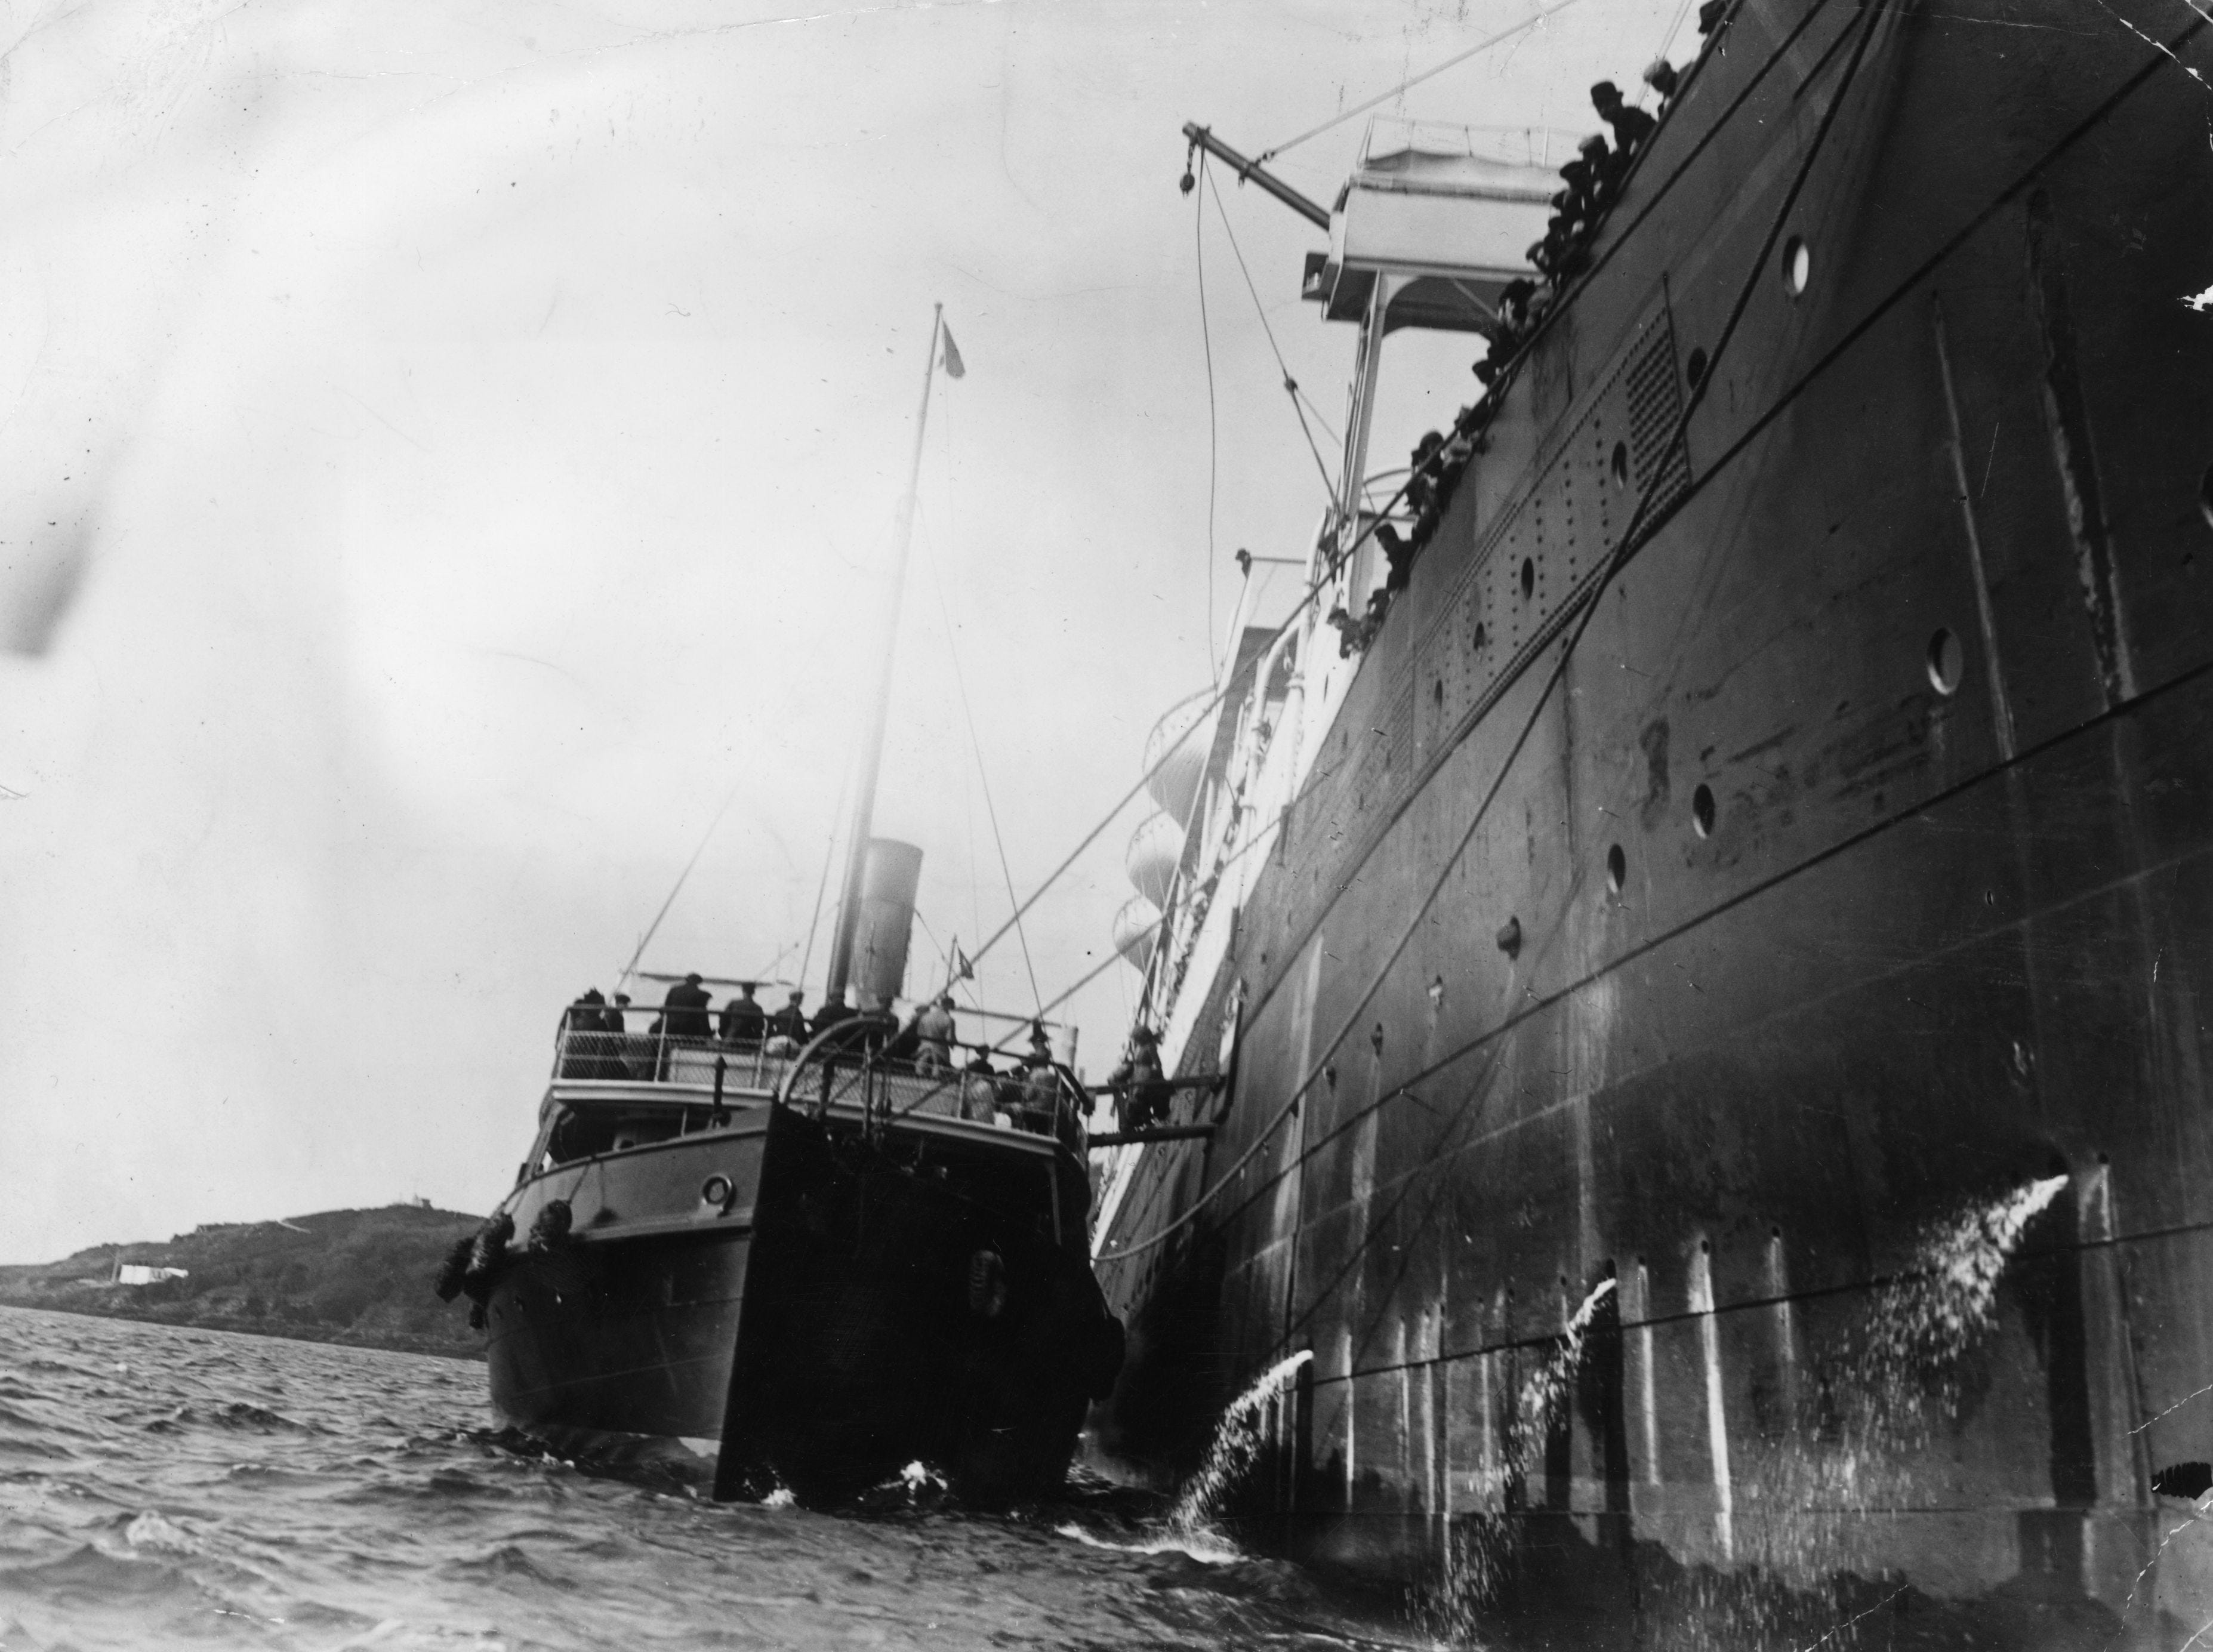 <p><a href="https://www.maritime-executive.com/article/carpathias-role-in-titanic-rescue">Rostron had ordered</a> the crew to ignore the calls from the press regarding the Titanic, so to get the scoop, journalists shouted questions at the passengers and crew through megaphones from the tugboats.</p>